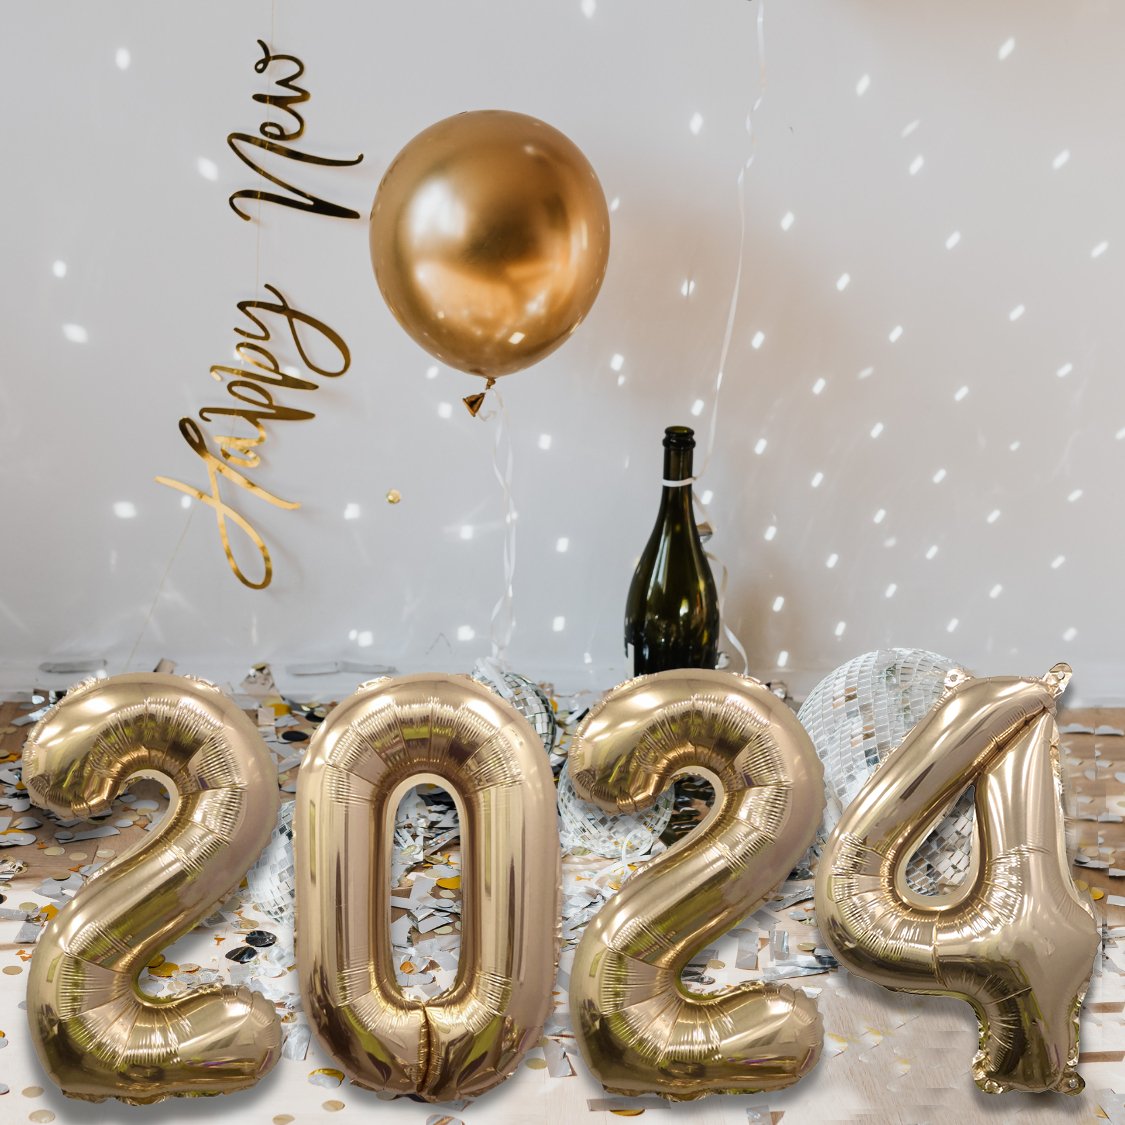 NYE 2024 Giant Gold Mylar Foil Number Balloons (32 Inches) - Ellie's Party Supply